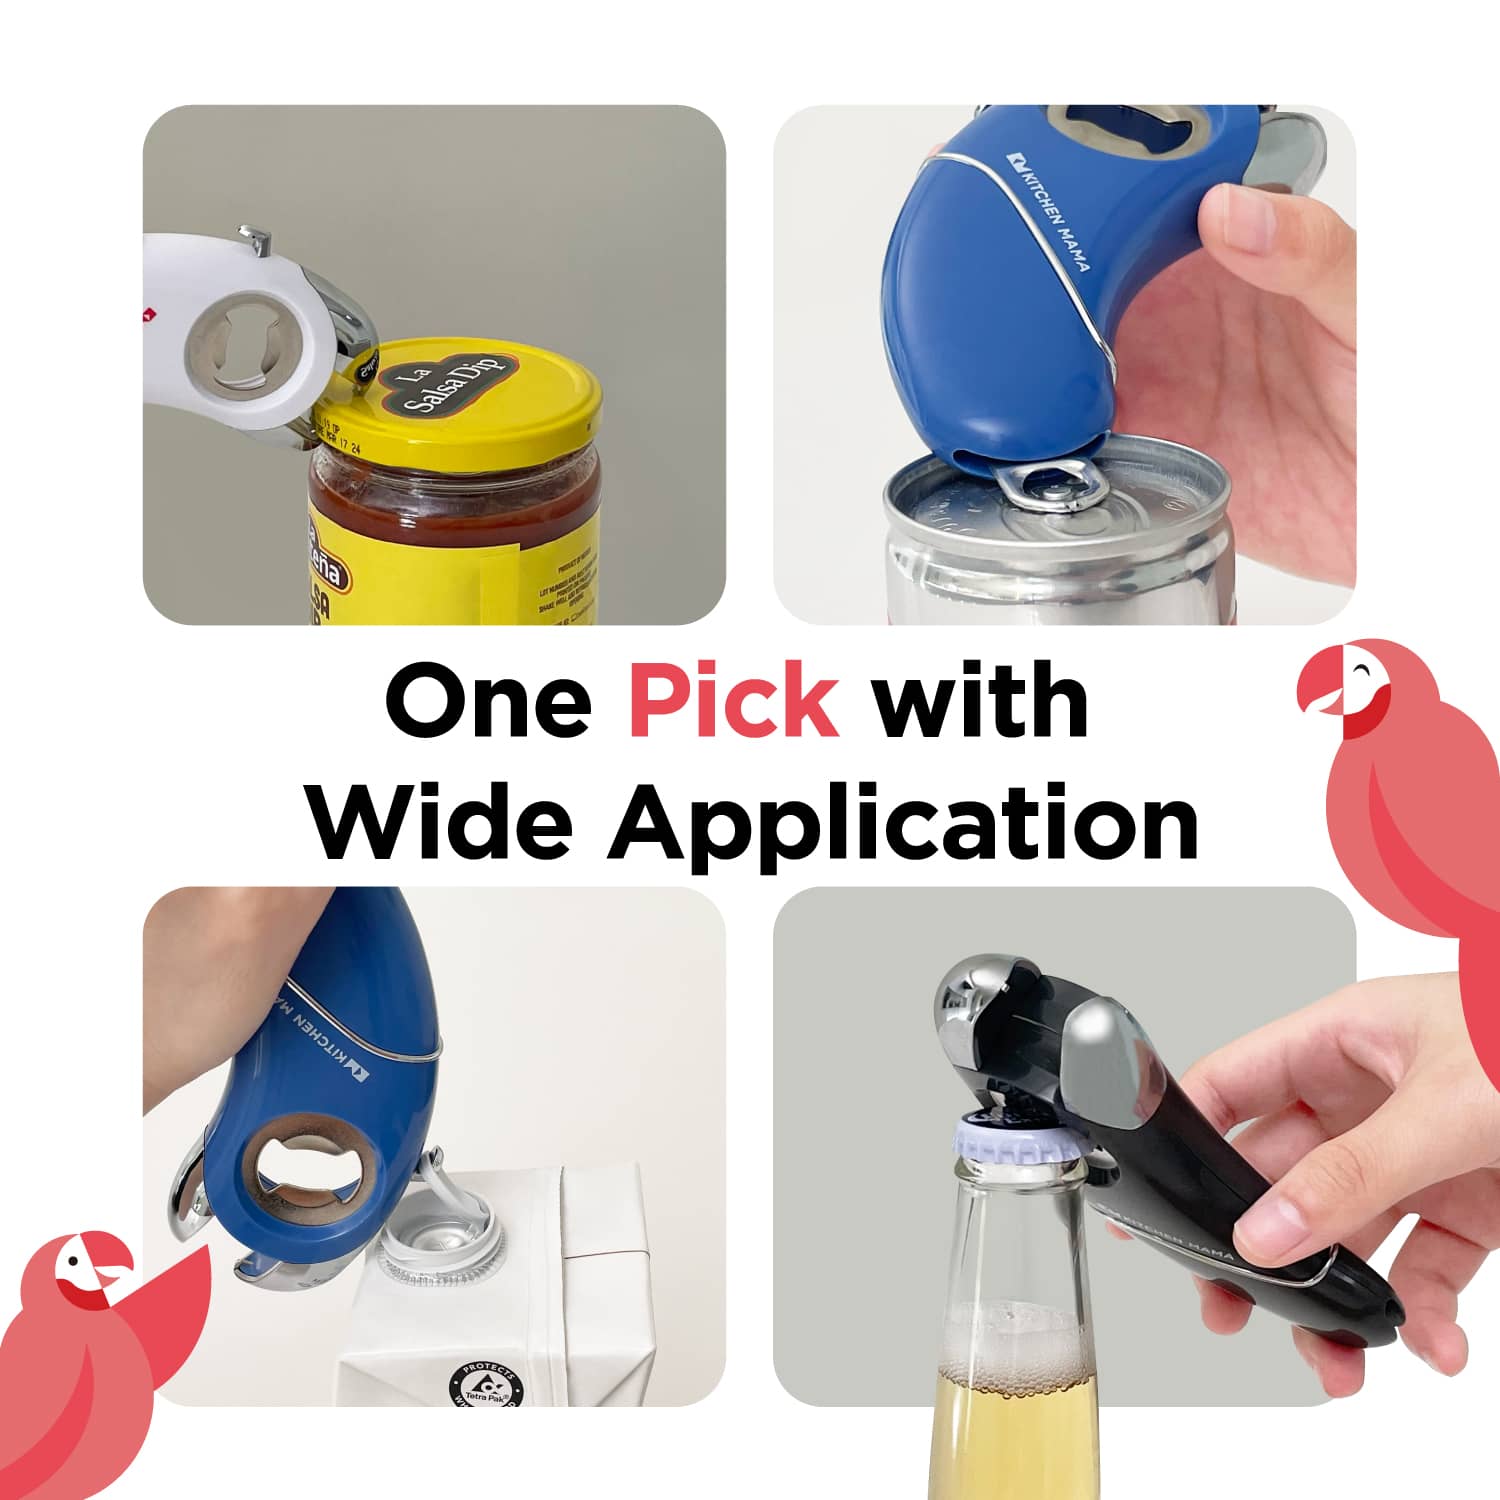 Epic One Multifunction Opener - Picking One Opens Up A Variety, MO5600-W, White, MO5600-B, Blue, MO5600-M, Metal Gray